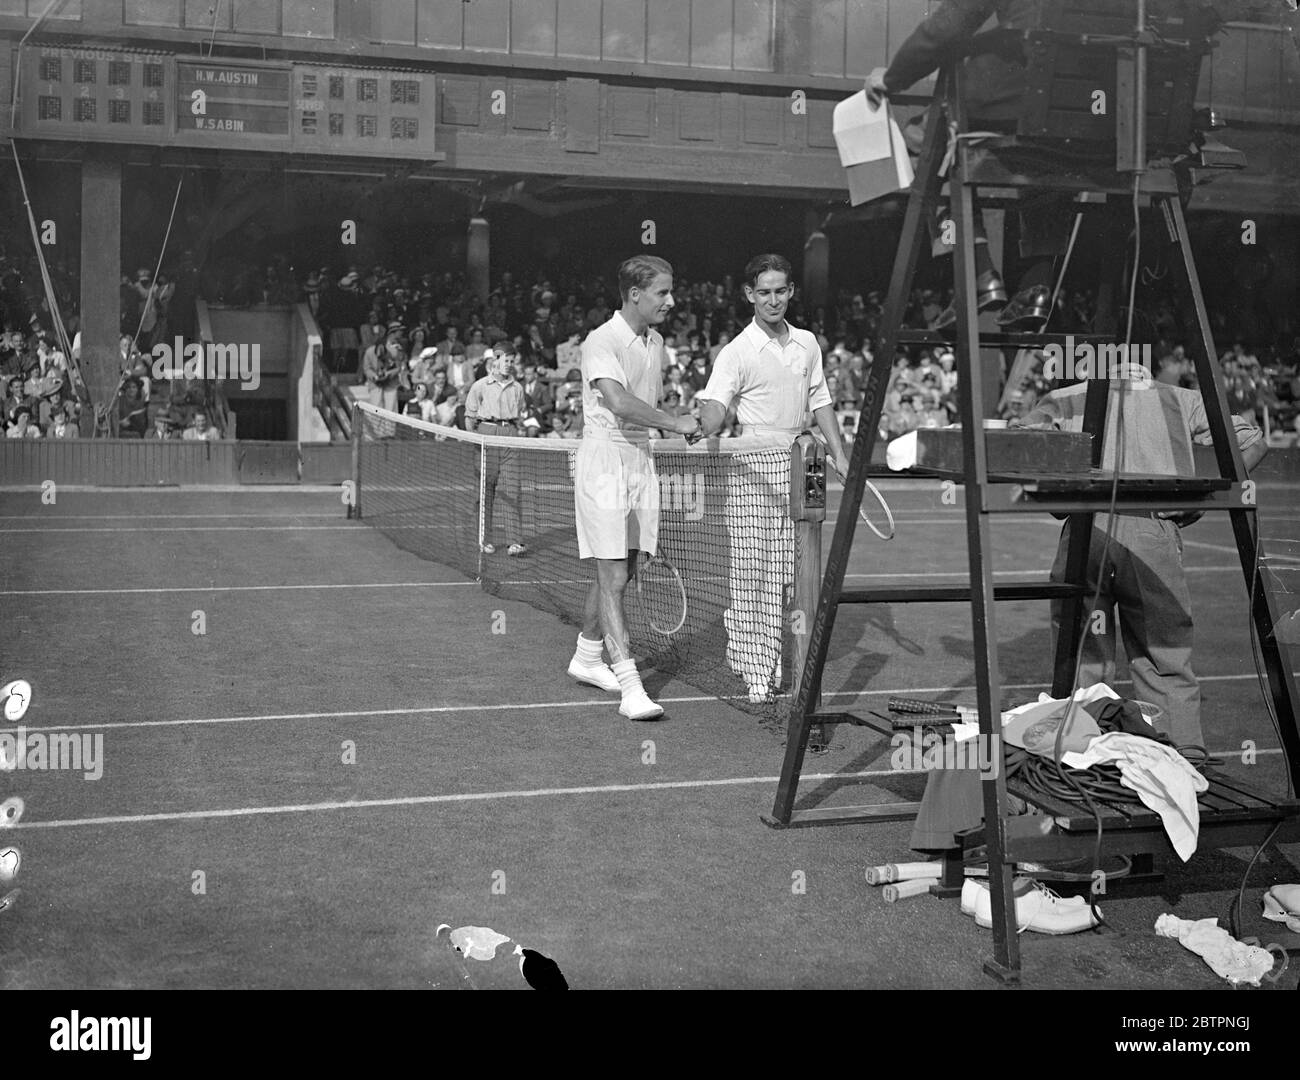 Austin defeats American at Wimbledon. H W (Bunny) Austin of Great Britain beat the American, W Sazin, 6-2,6-3,6-0 in the men's singles at Wimbledon. Photo shows, H W Austin being congratulated by W Sazin after their match. 23 June 1937 Stock Photo